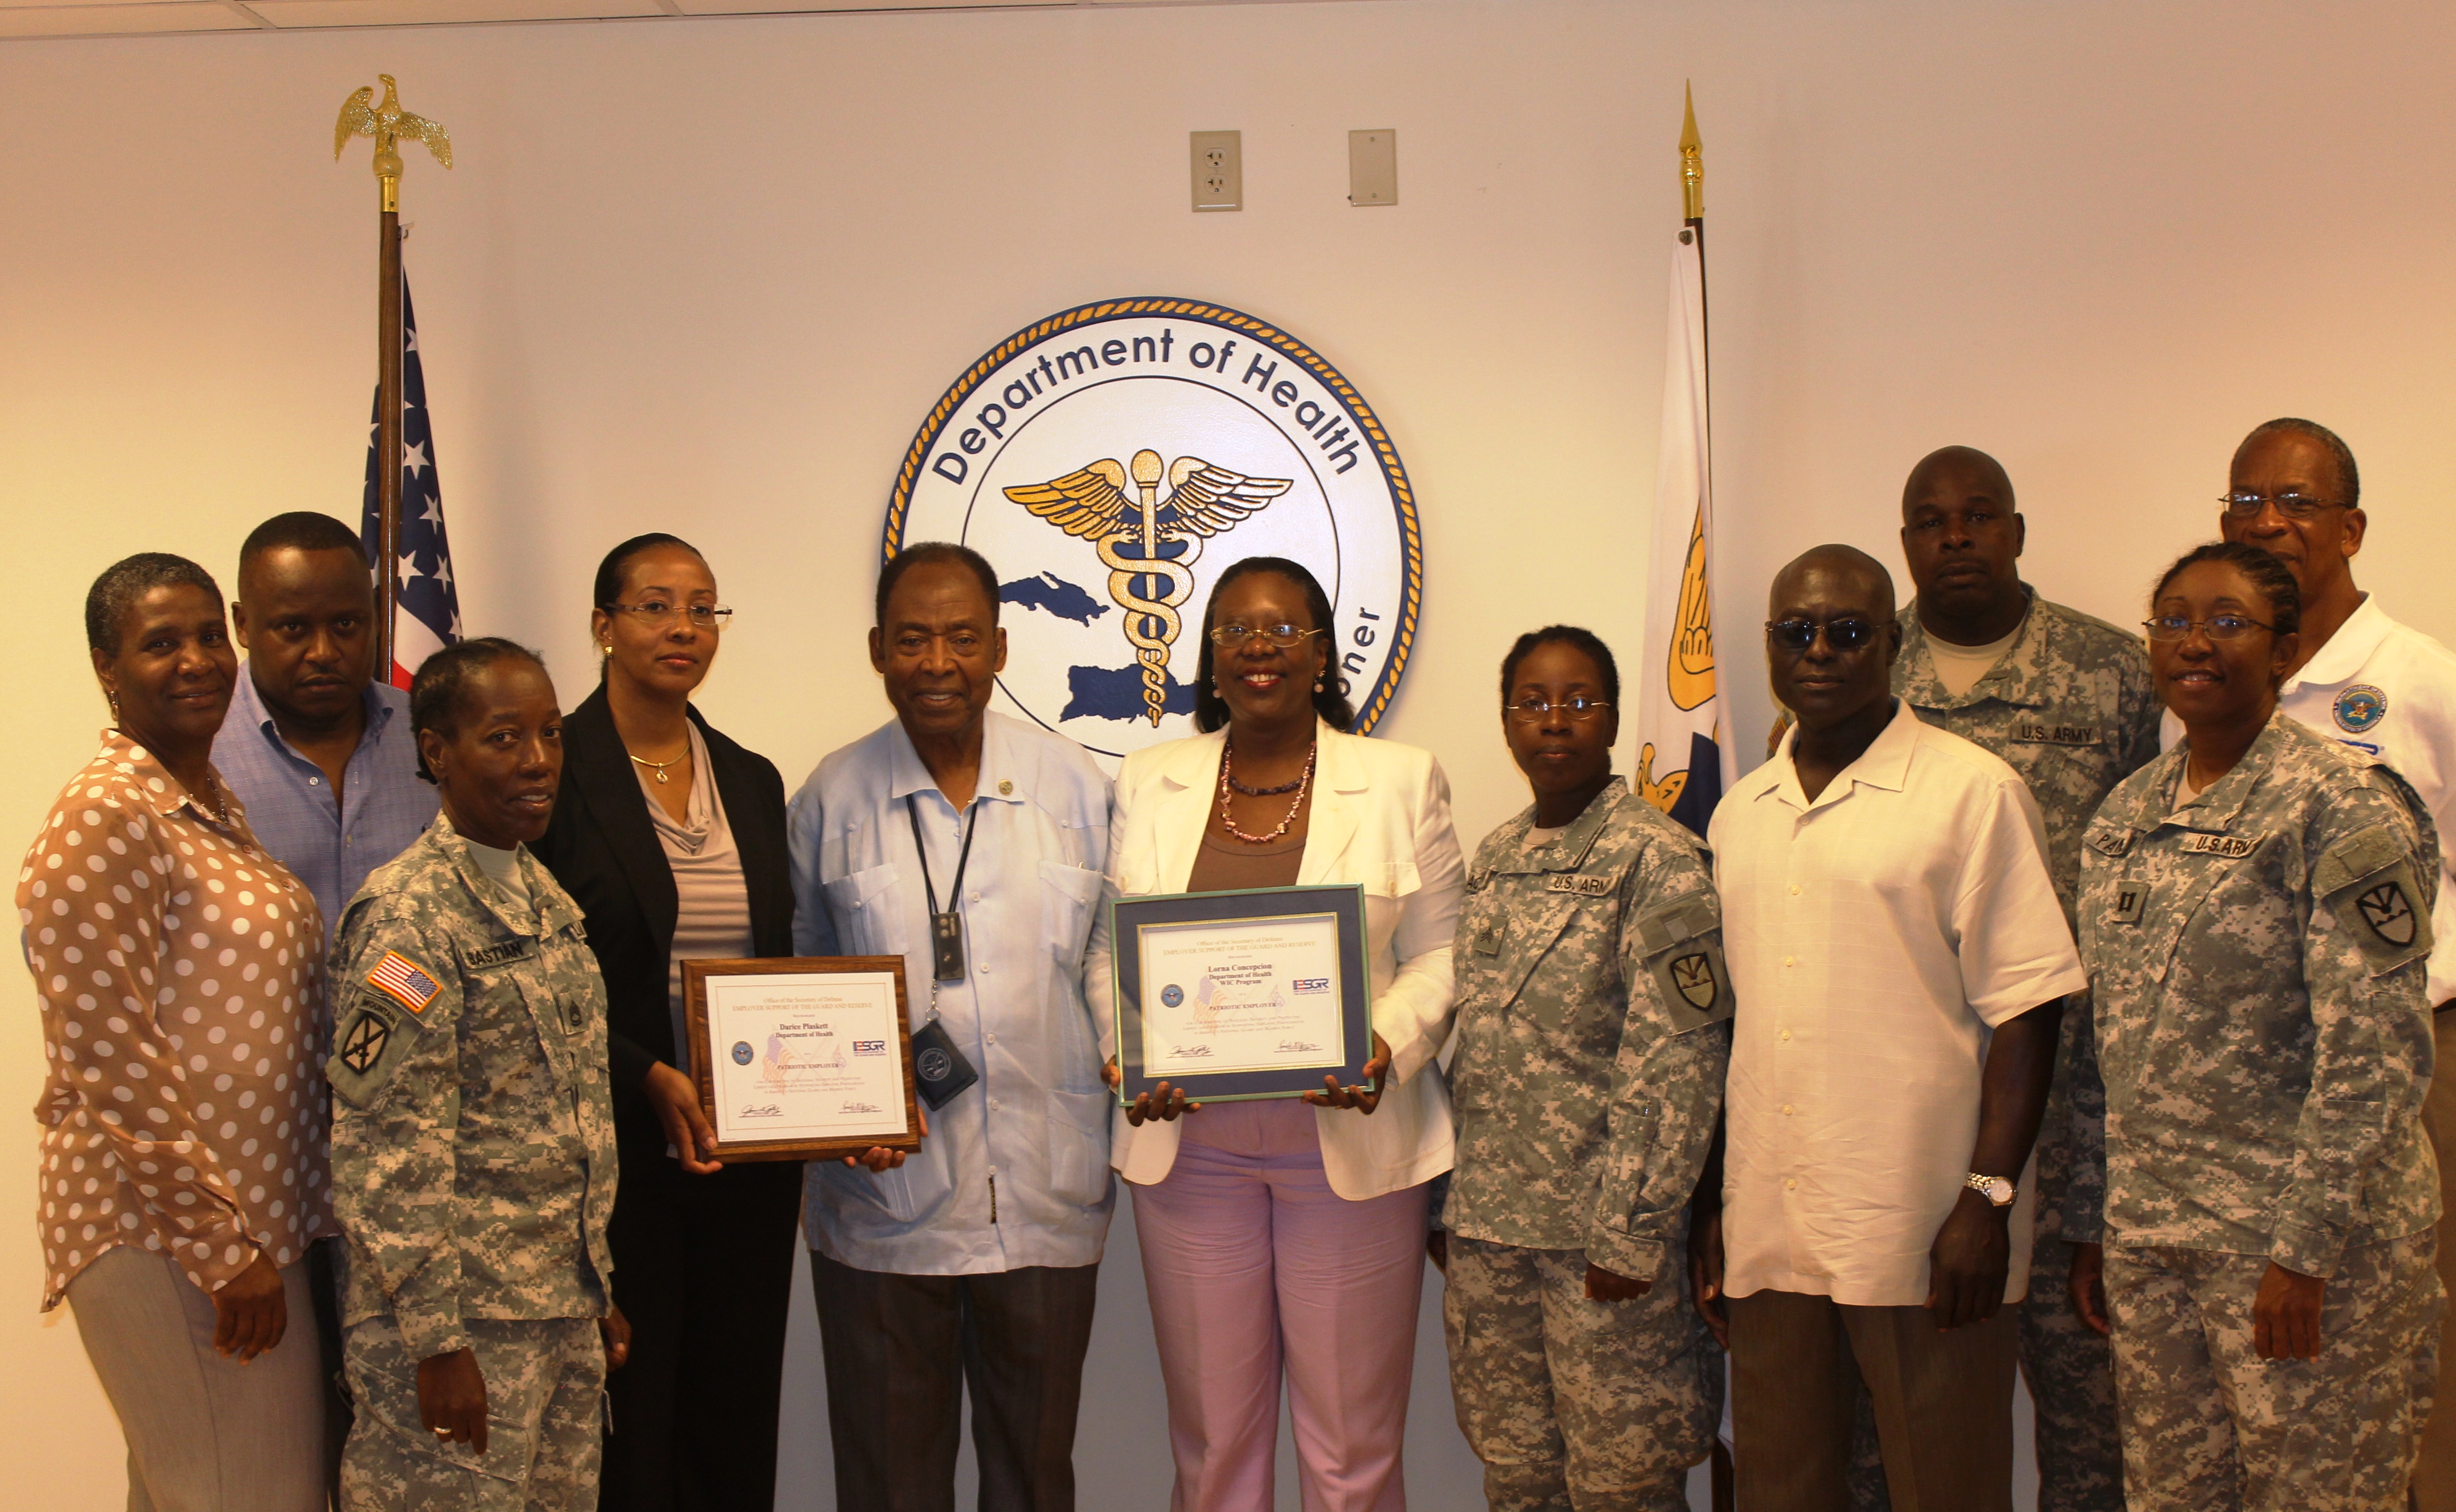 Department of Health; Dr. Marc Jerome, Territorial Health Officer/Medical Director, Department of Health; Acting Director of WIC Lorna Concepcion; SGT Azalea Macedon of the 610th QM CO; Beresford Edwards, ESGR Chair for the VI; SFC Joseph James; CPT Nicole Payne, Commander 610th QM CO; and Mr. Paul Radix, ESGR Employer Outreach Director were in attendance. 